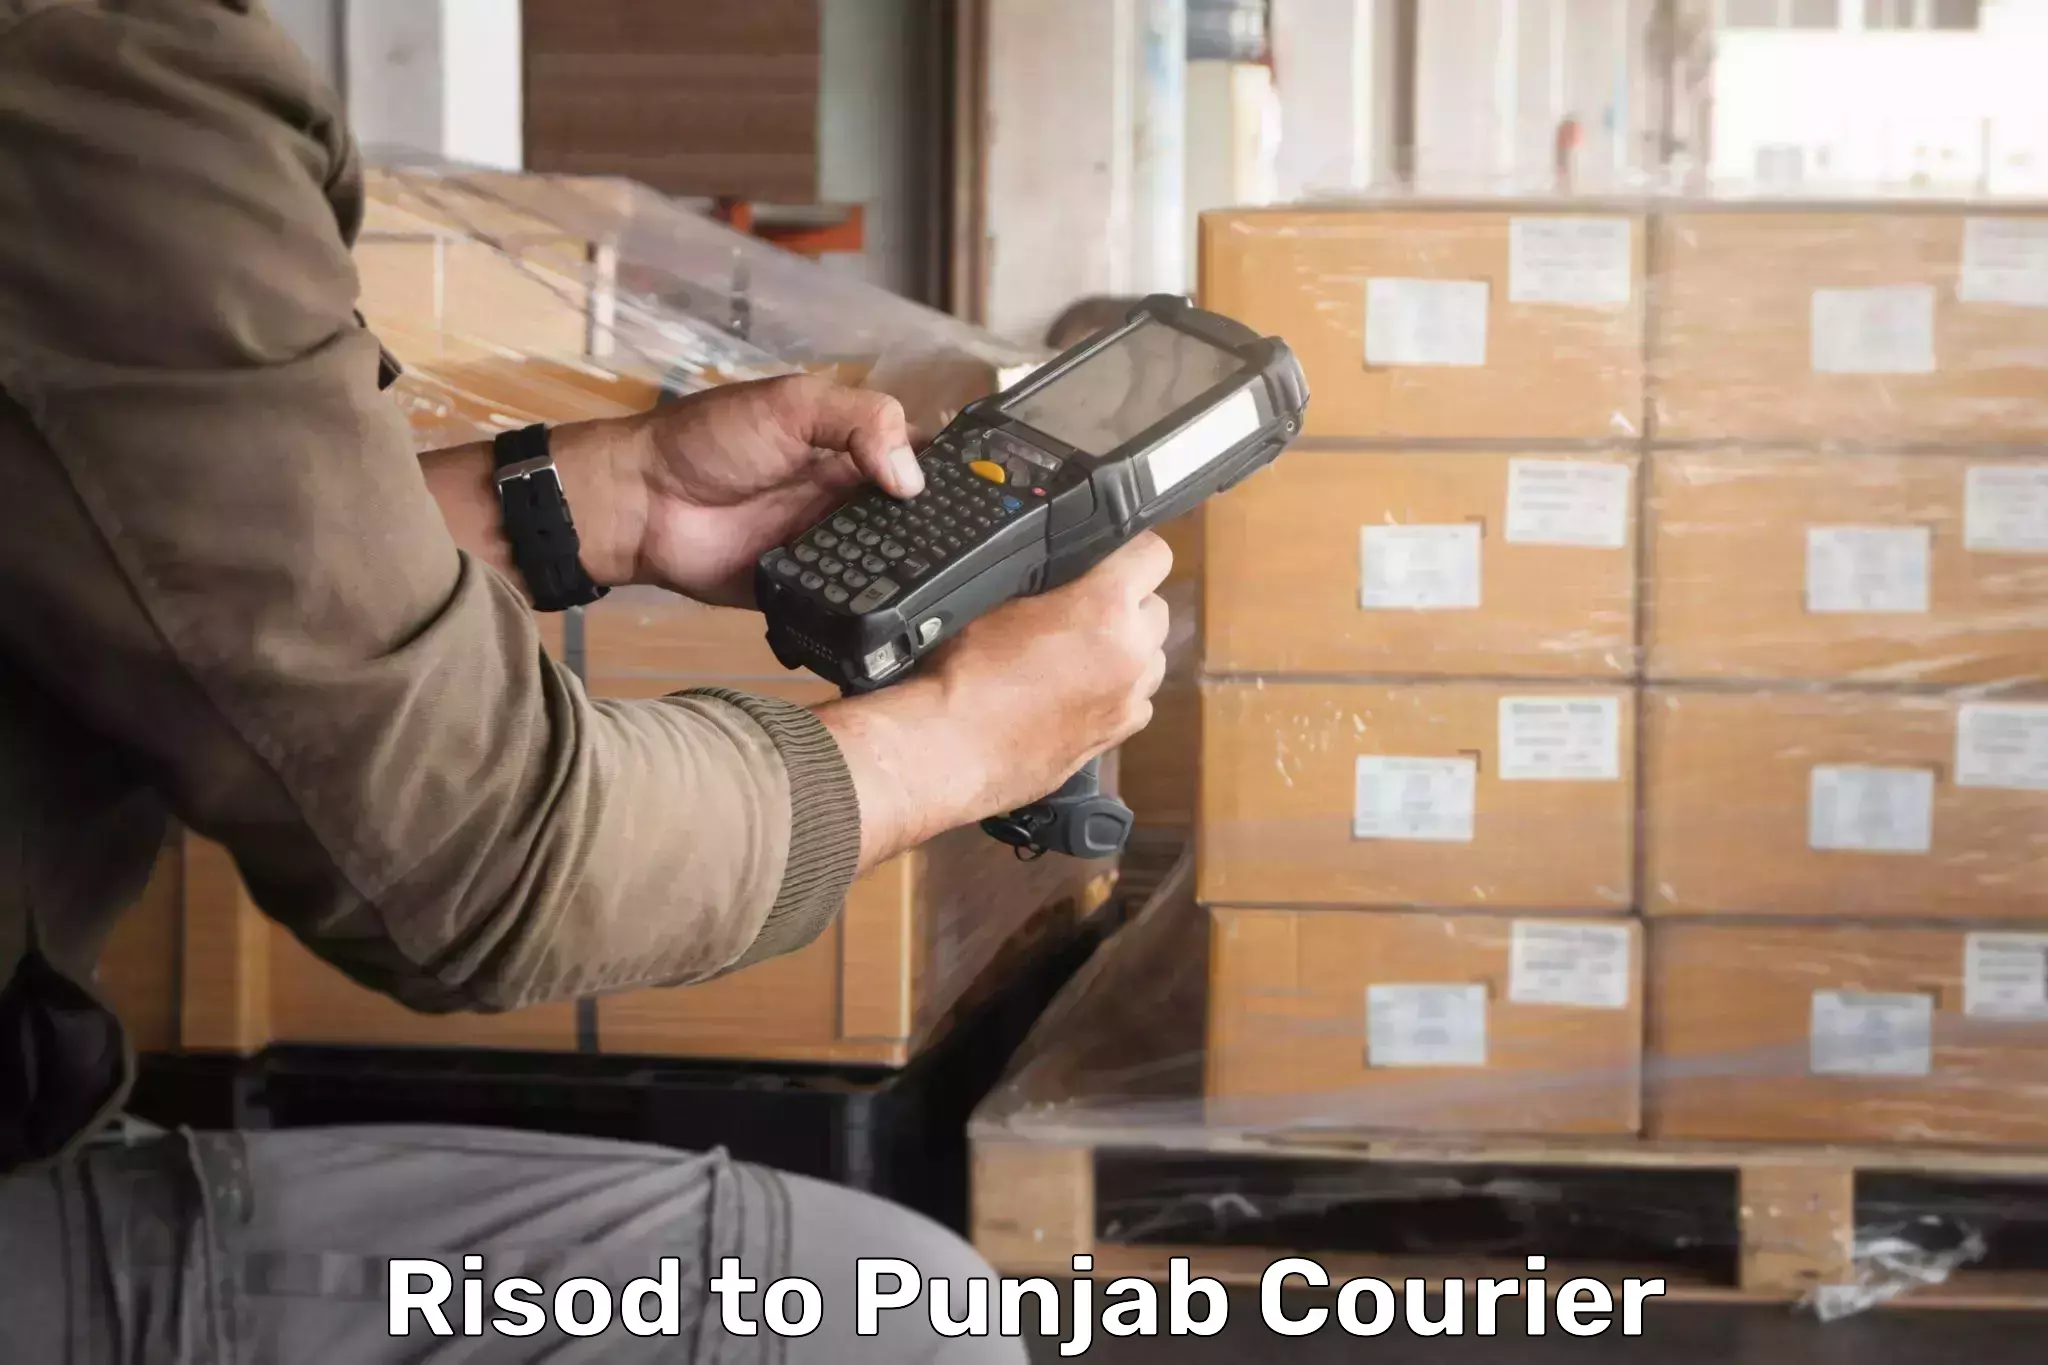 International courier networks Risod to Punjab